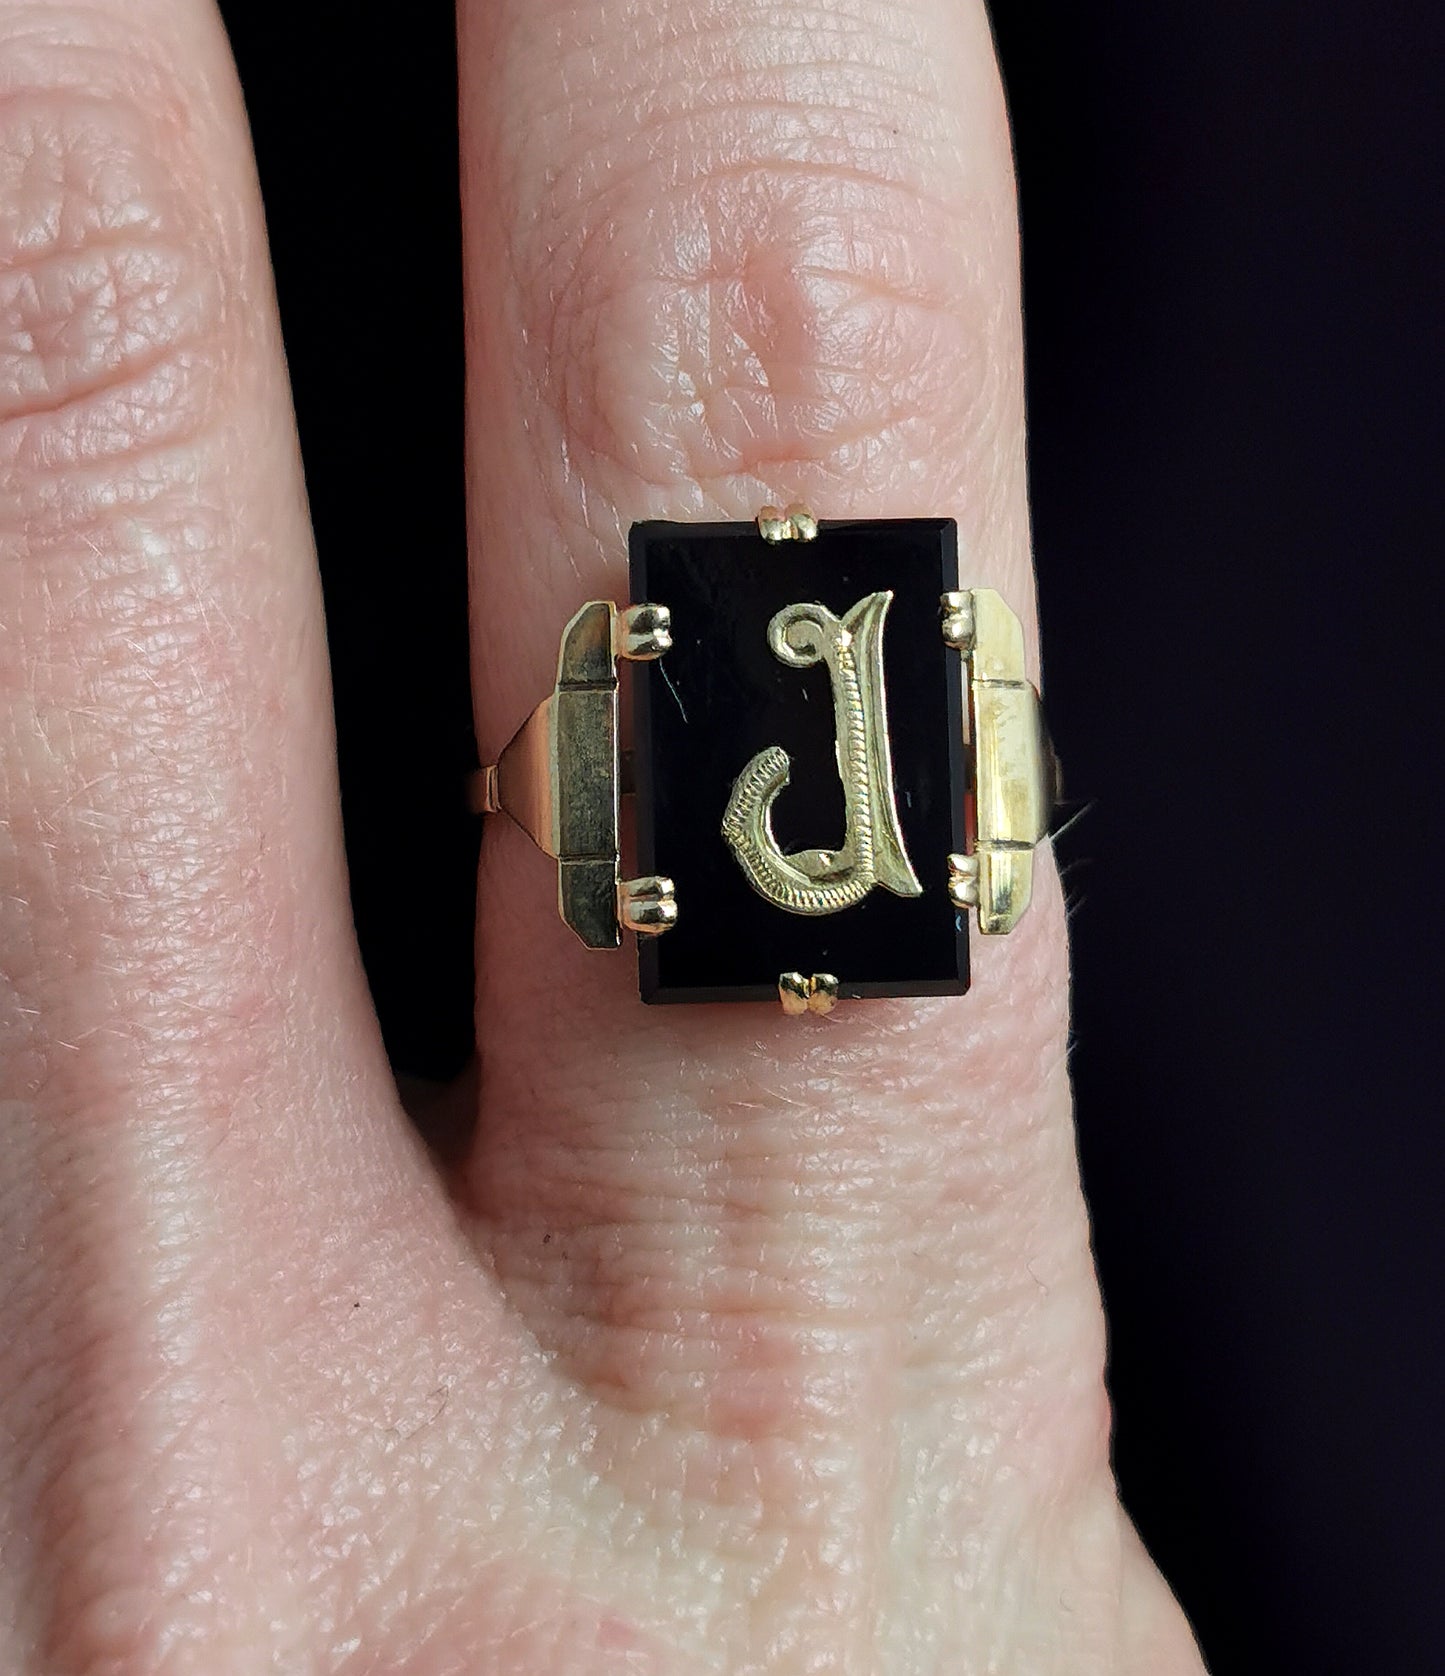 Antique Mourning ring, initial J, onyx and 9ct gold, Art Deco